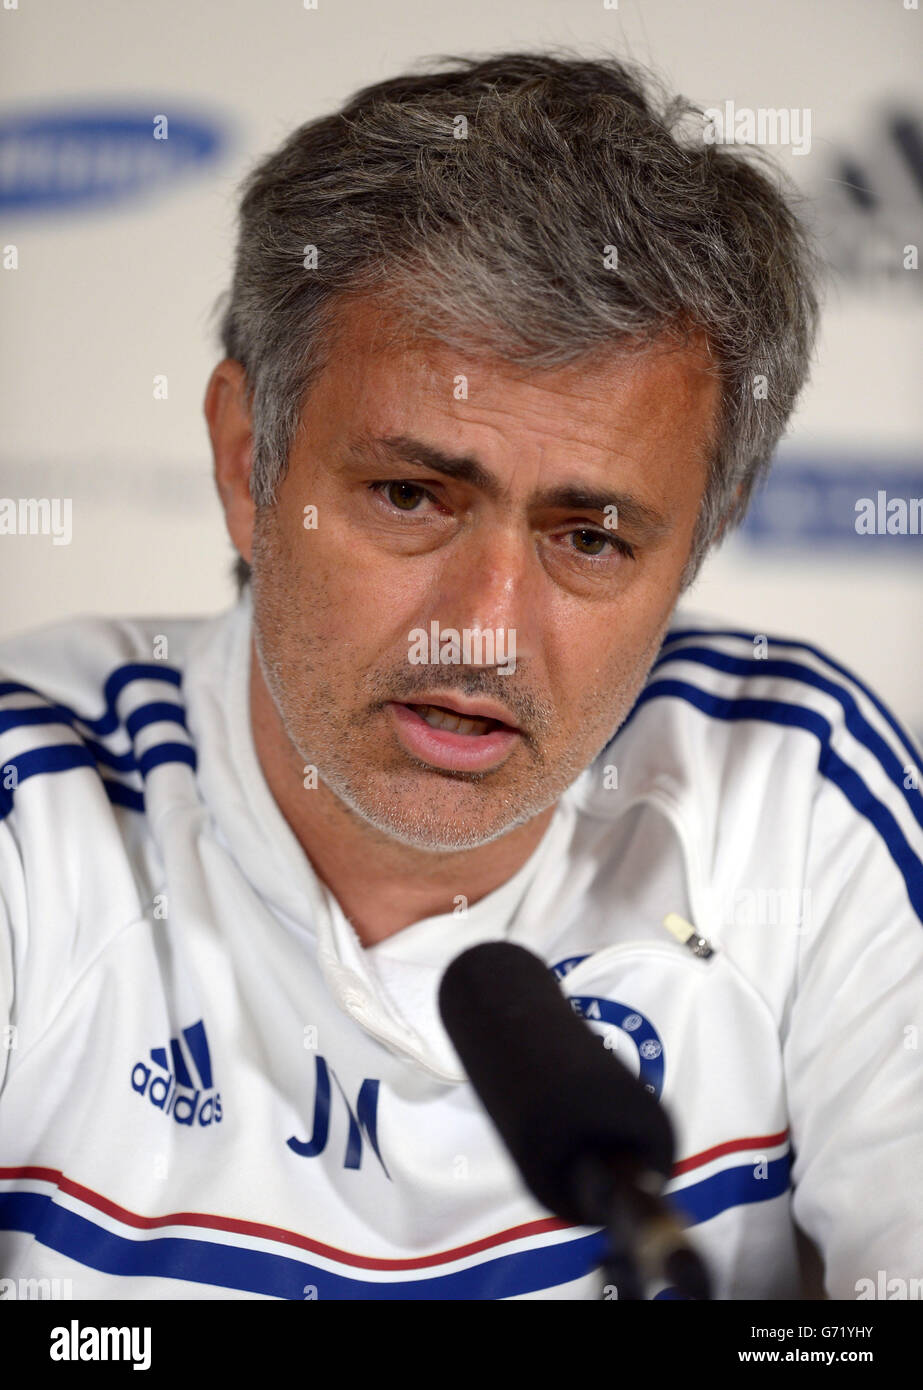 Chelsea's Manager Jose Mourinho during the press conference at Chelsea FC Training Ground, Stoke D'Abernon. PRESS ASSOCIATION Photo. Picture date: Friday May 2, 2014. See PA story SOCCER Chelsea. Photo credit should read: Adam Davy/PA Wire. Stock Photo